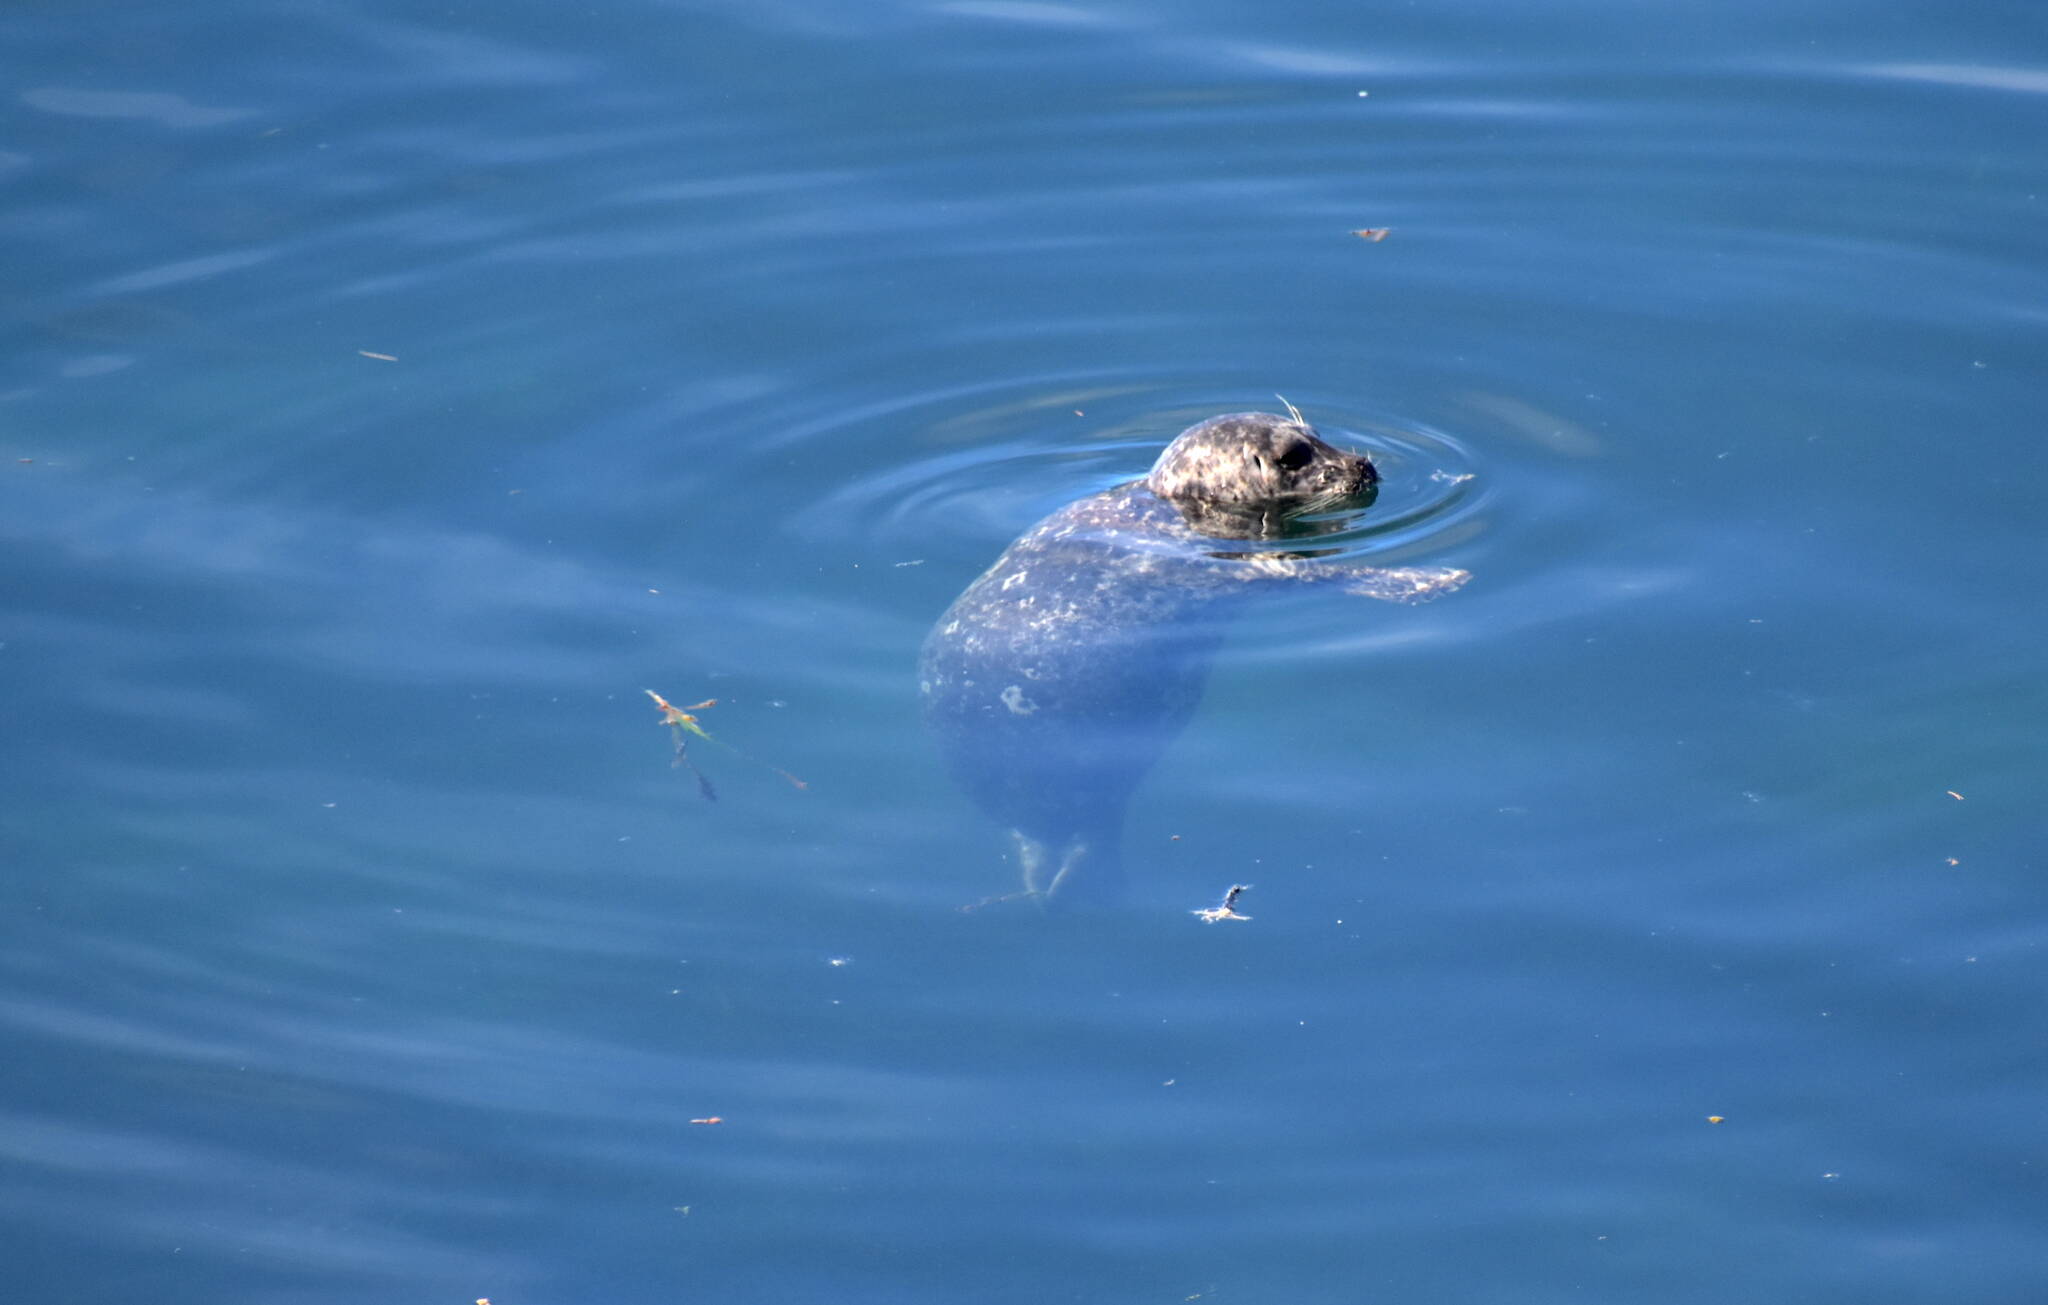 A harbor seal floats lethargically in the shallow waters near the site of the vessel sinking surrounded by a sheen of diesel fuel.